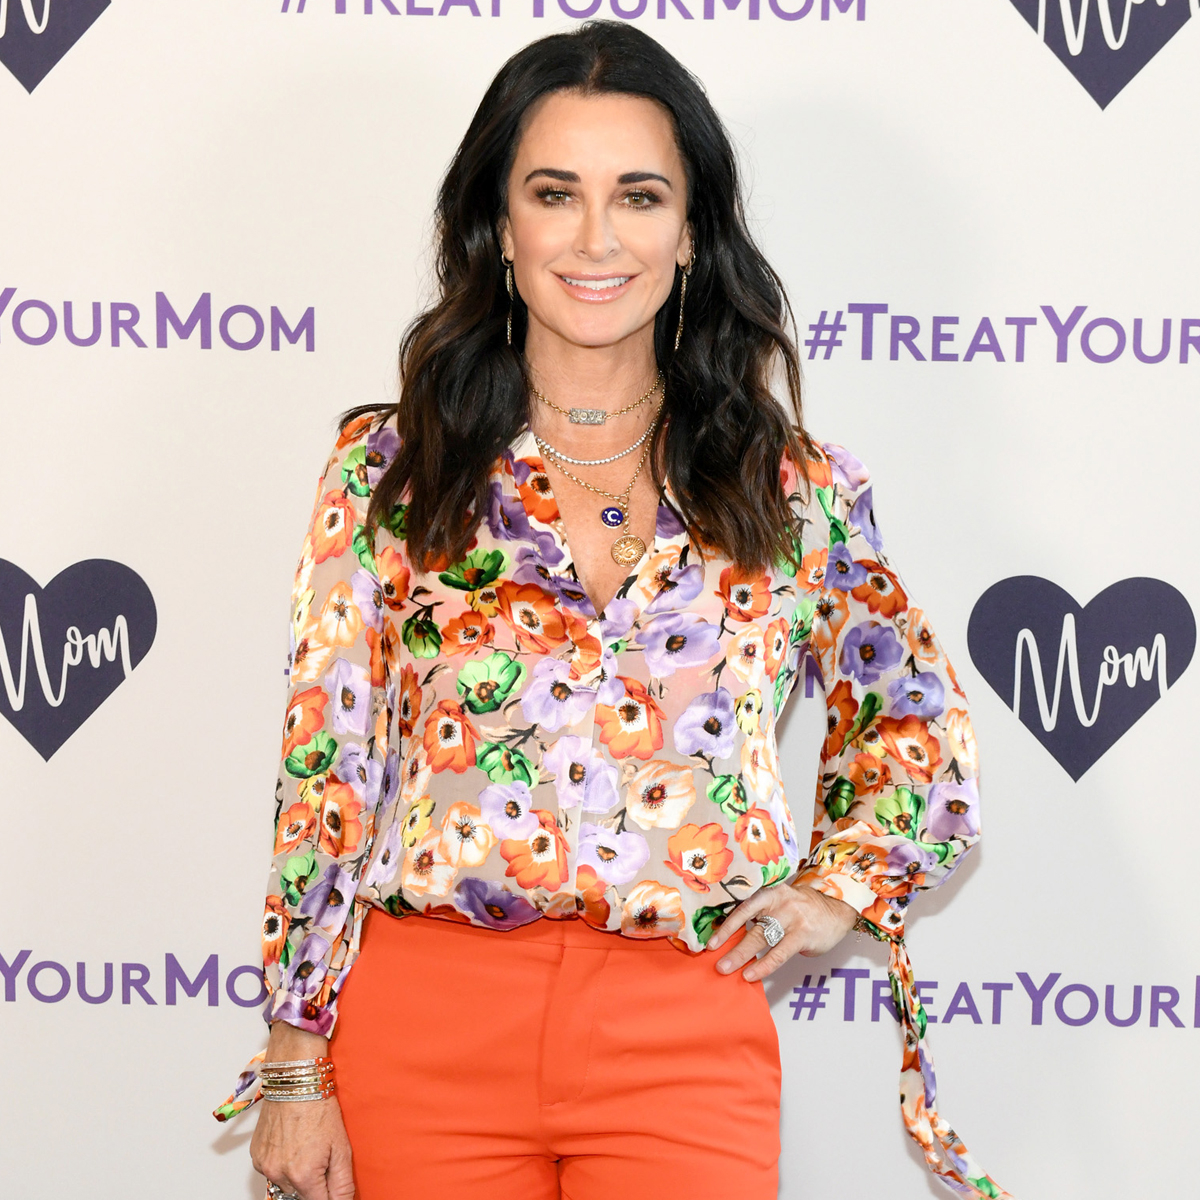 Kyle Richards The Real Housewives of Beverly Hills 8.05 Unfashionably Late  – Star Style